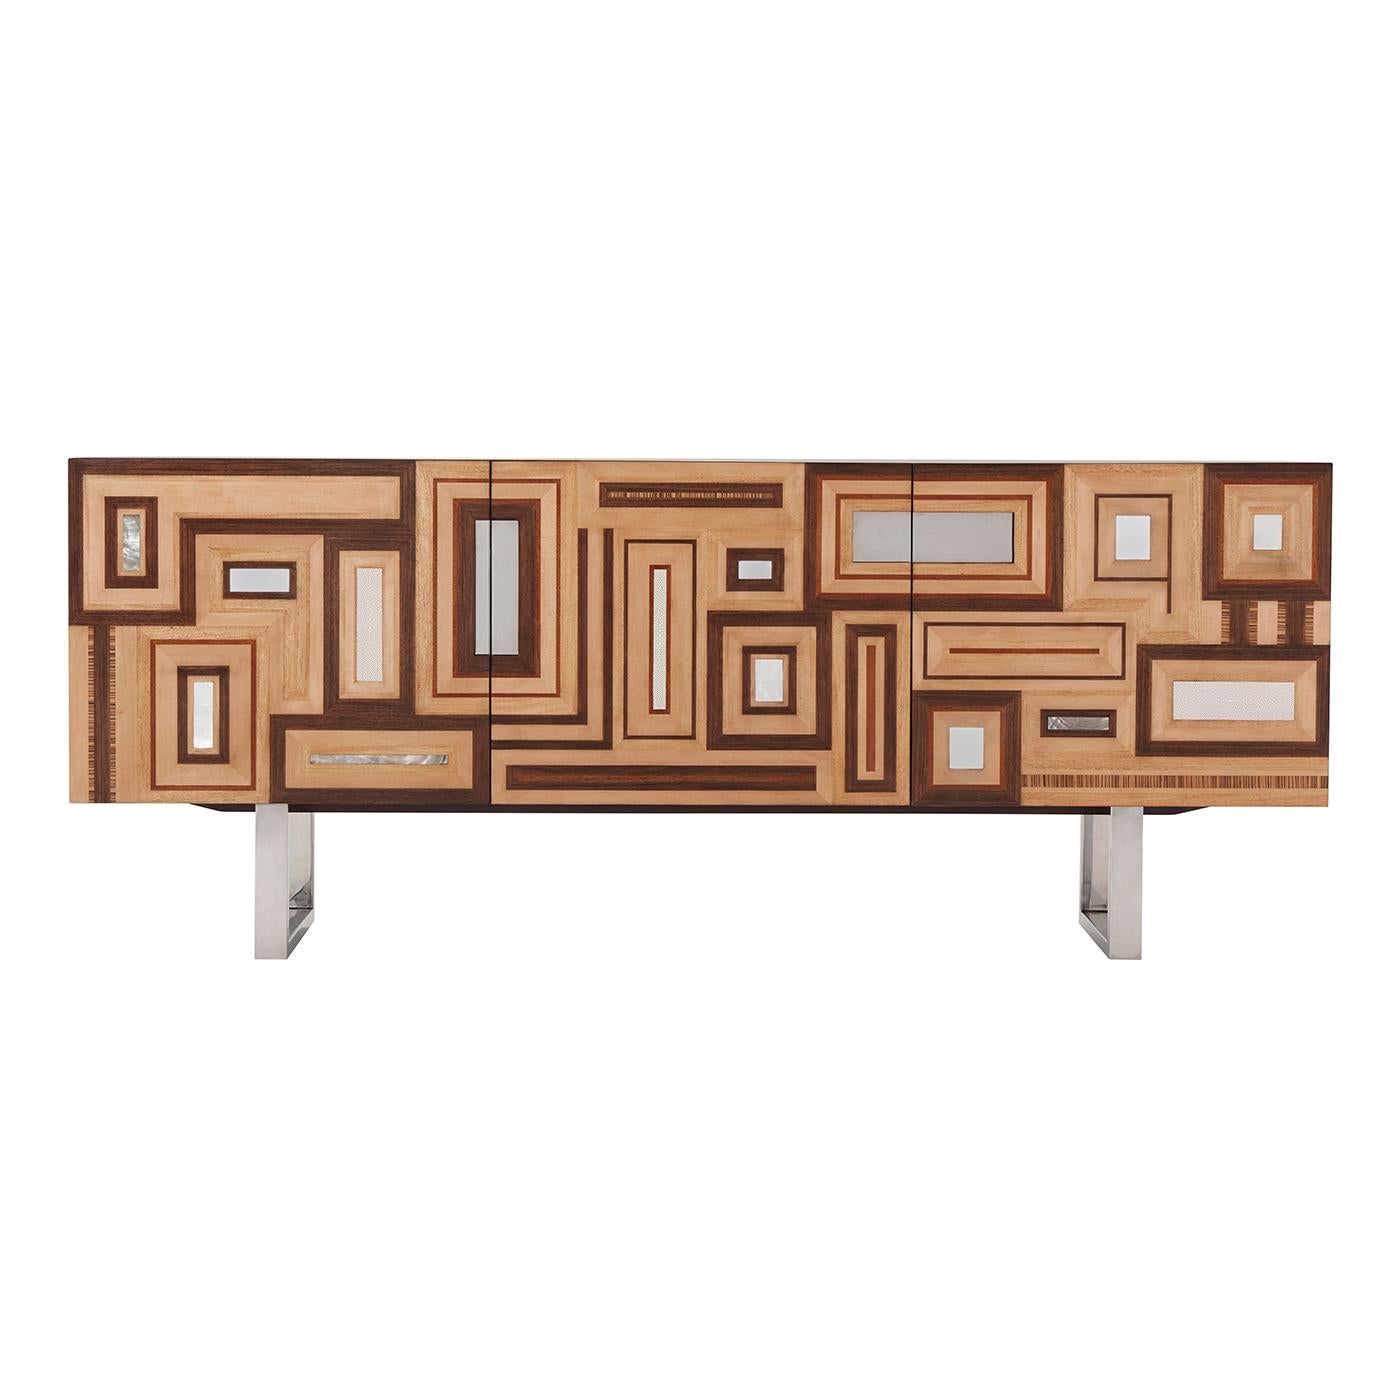 A Mid-Century Modern sideboard with a quartered walnut veneered parquetry inlaid doors with shagreen, faux Horn, and mother of pearl inlaid panels details and with recessed stainless steel backed handles. The two-section mahogany veneered interior